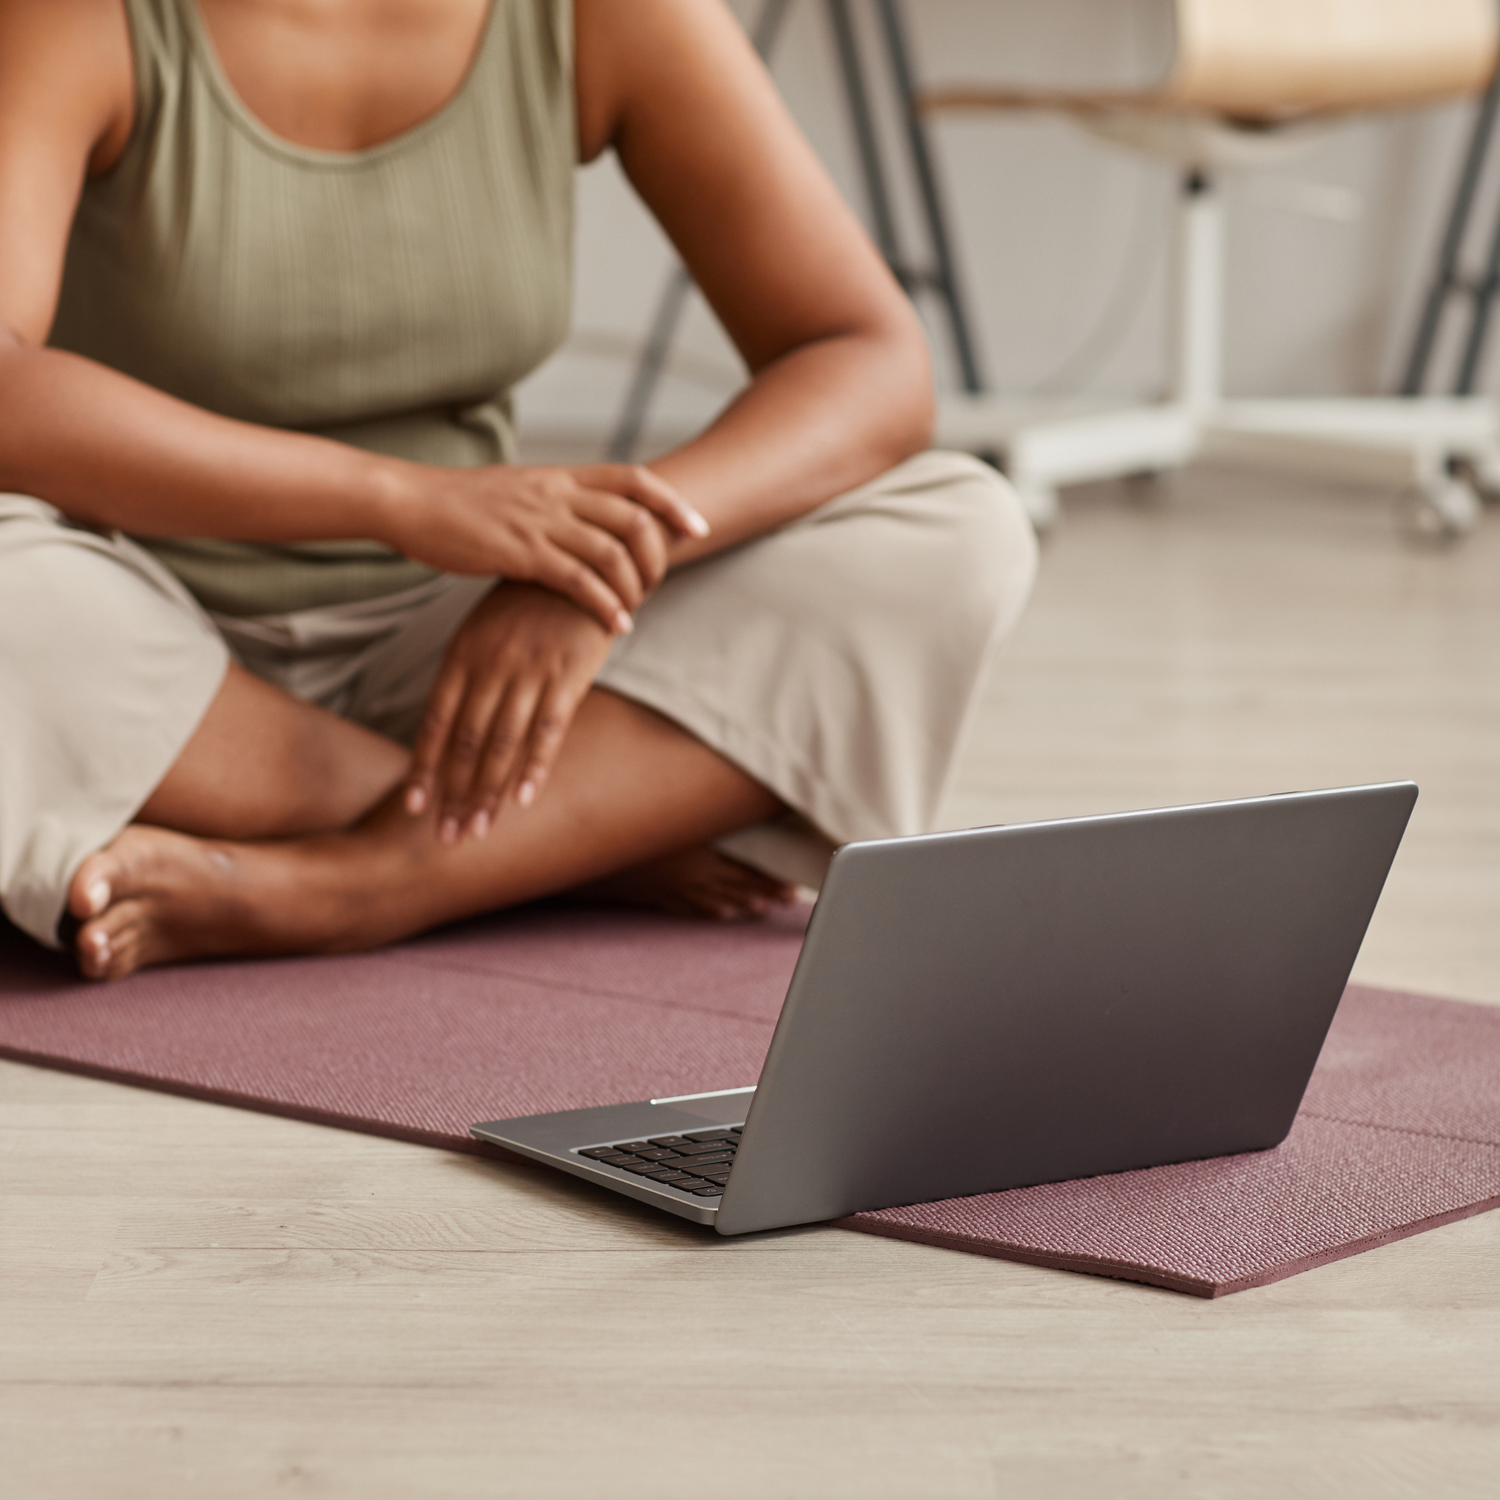 A photograph of a woman sitting on a yoga mat and looking at a laptop.